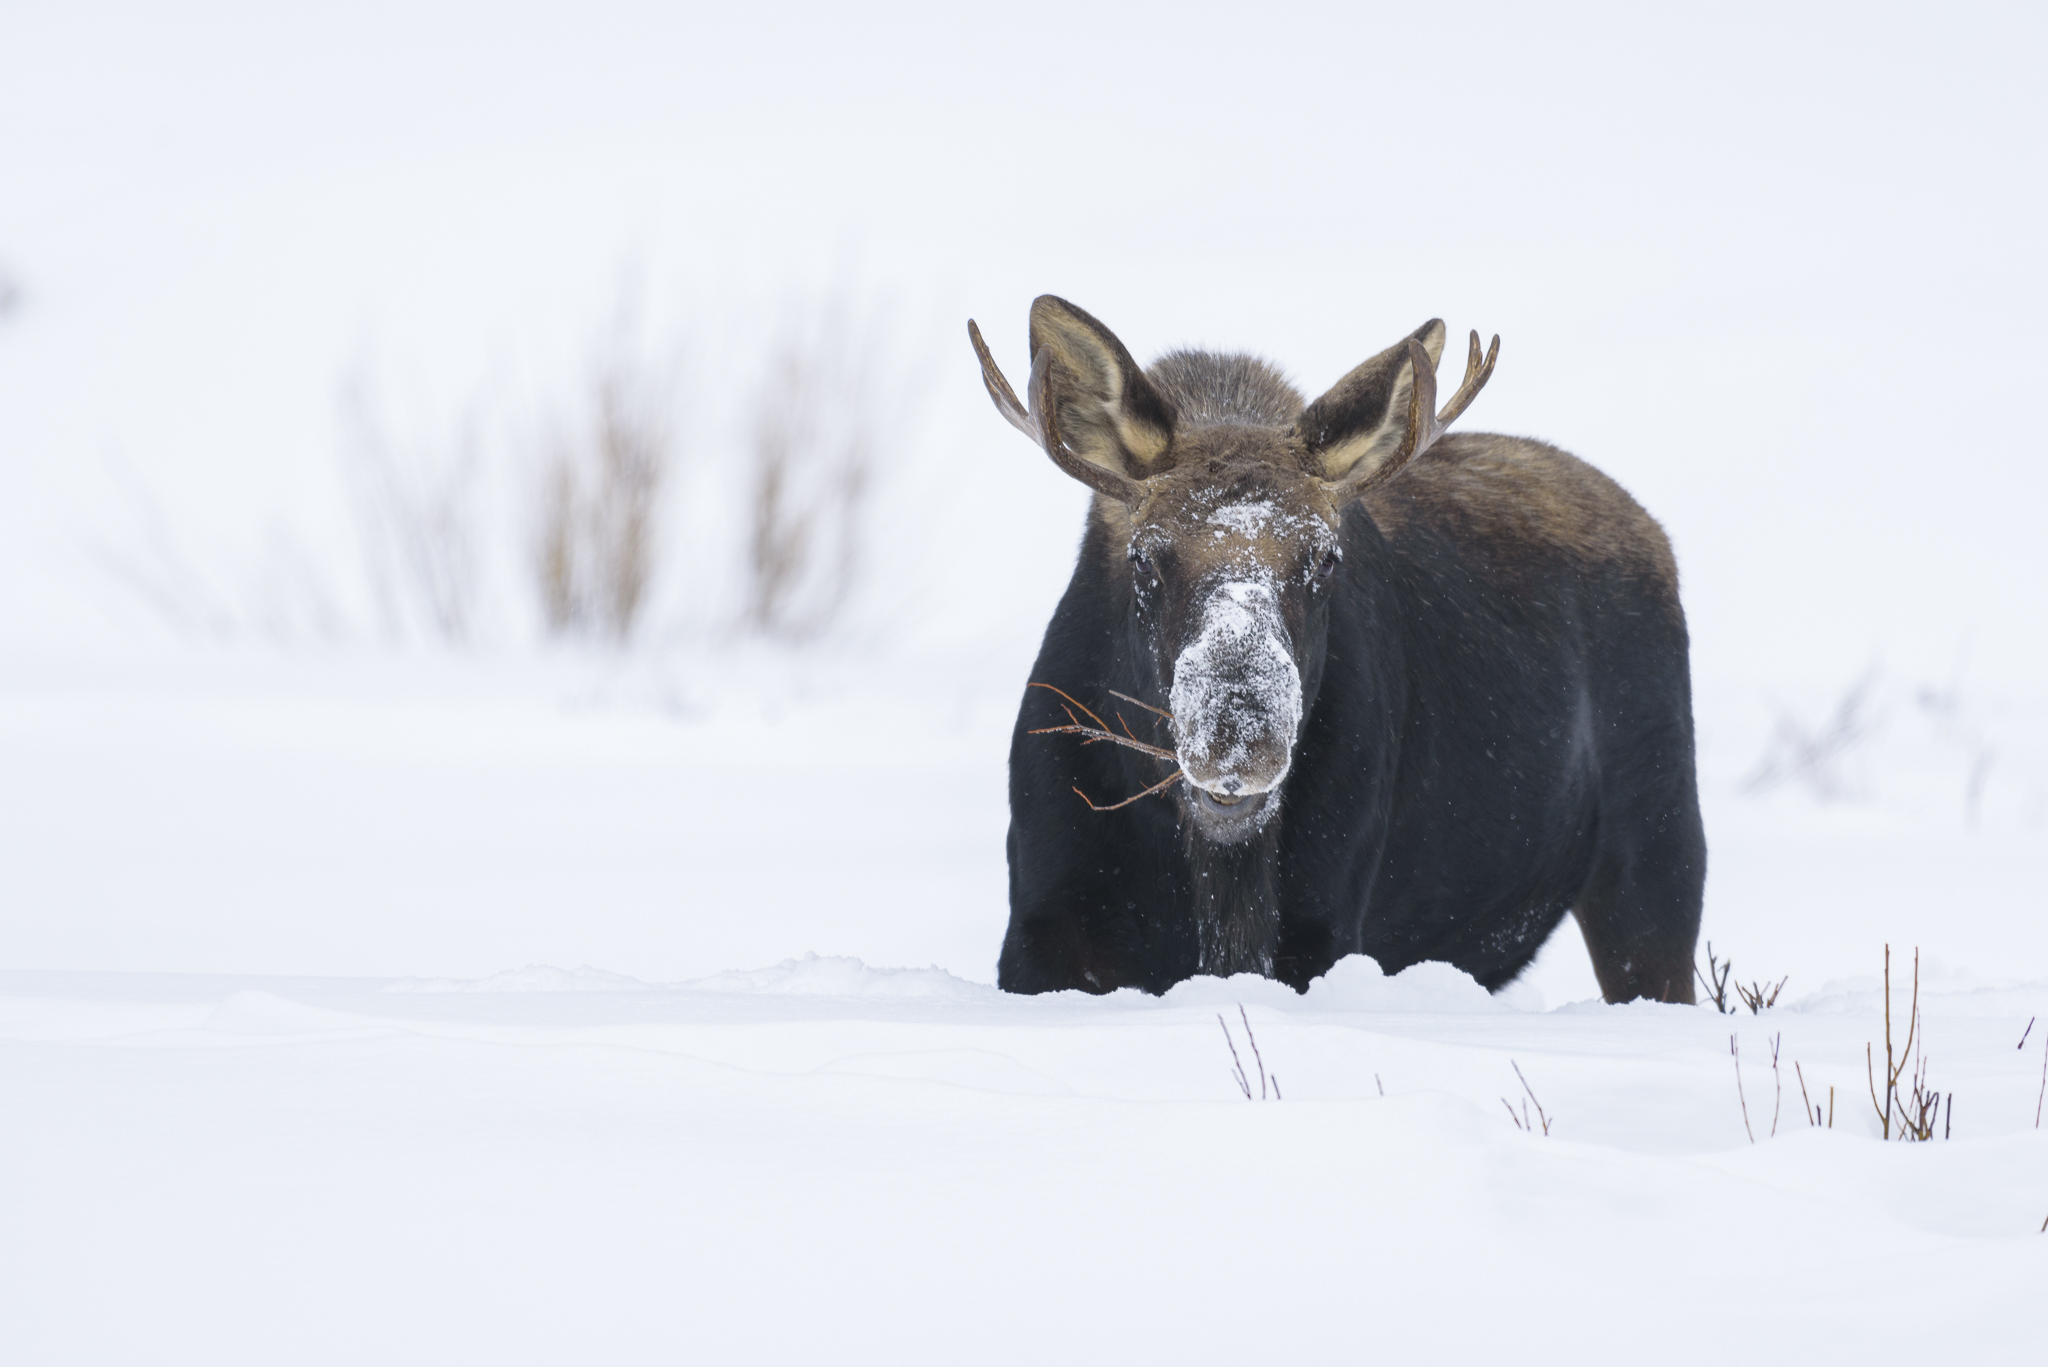 While Other Species Struggle Against Jackson's Heavy Winter, Moose ...